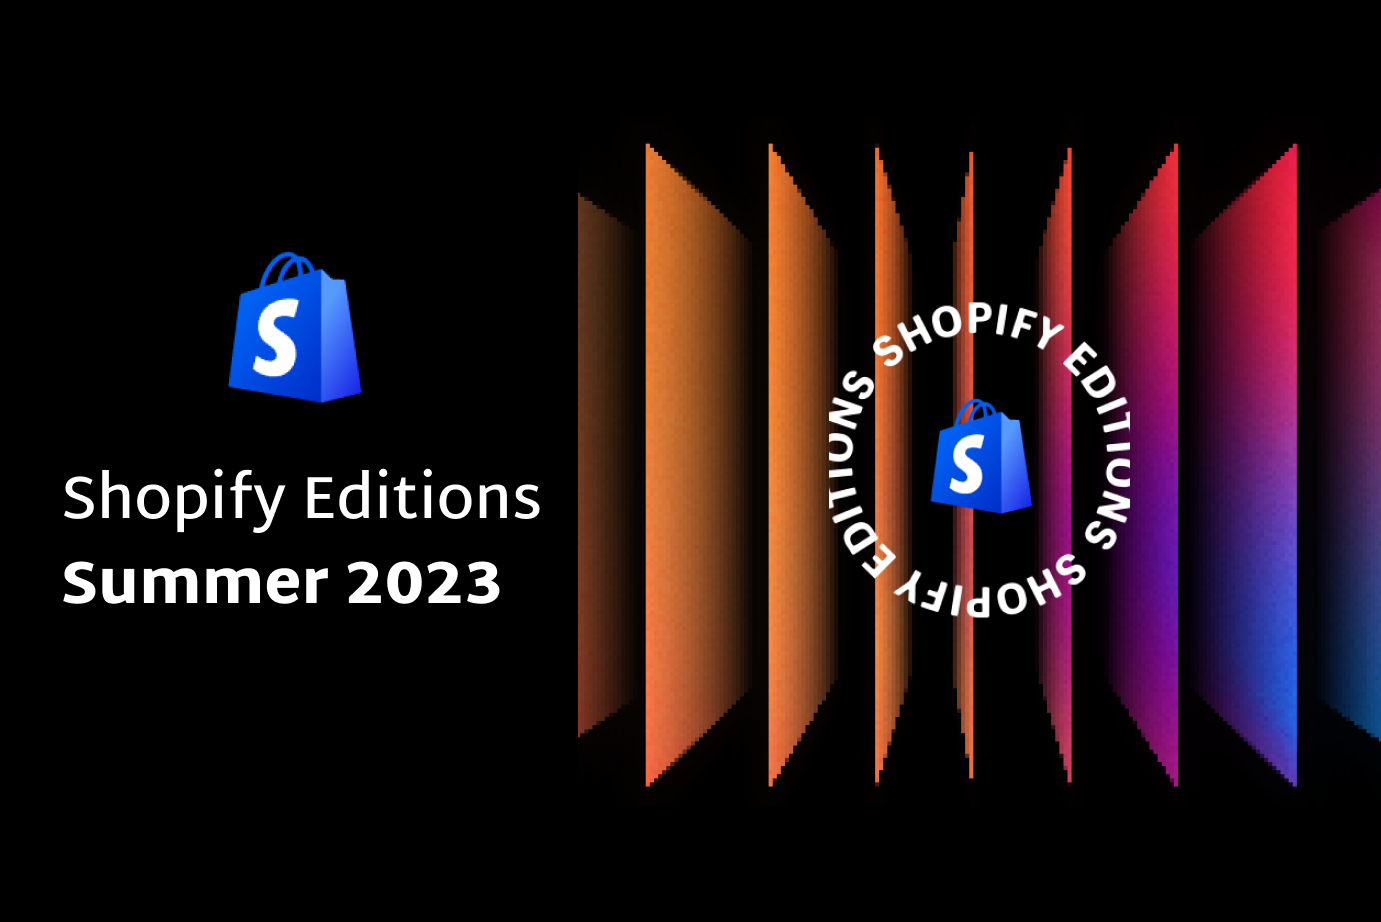 Shopify Editions Summer 2023: Major Updates